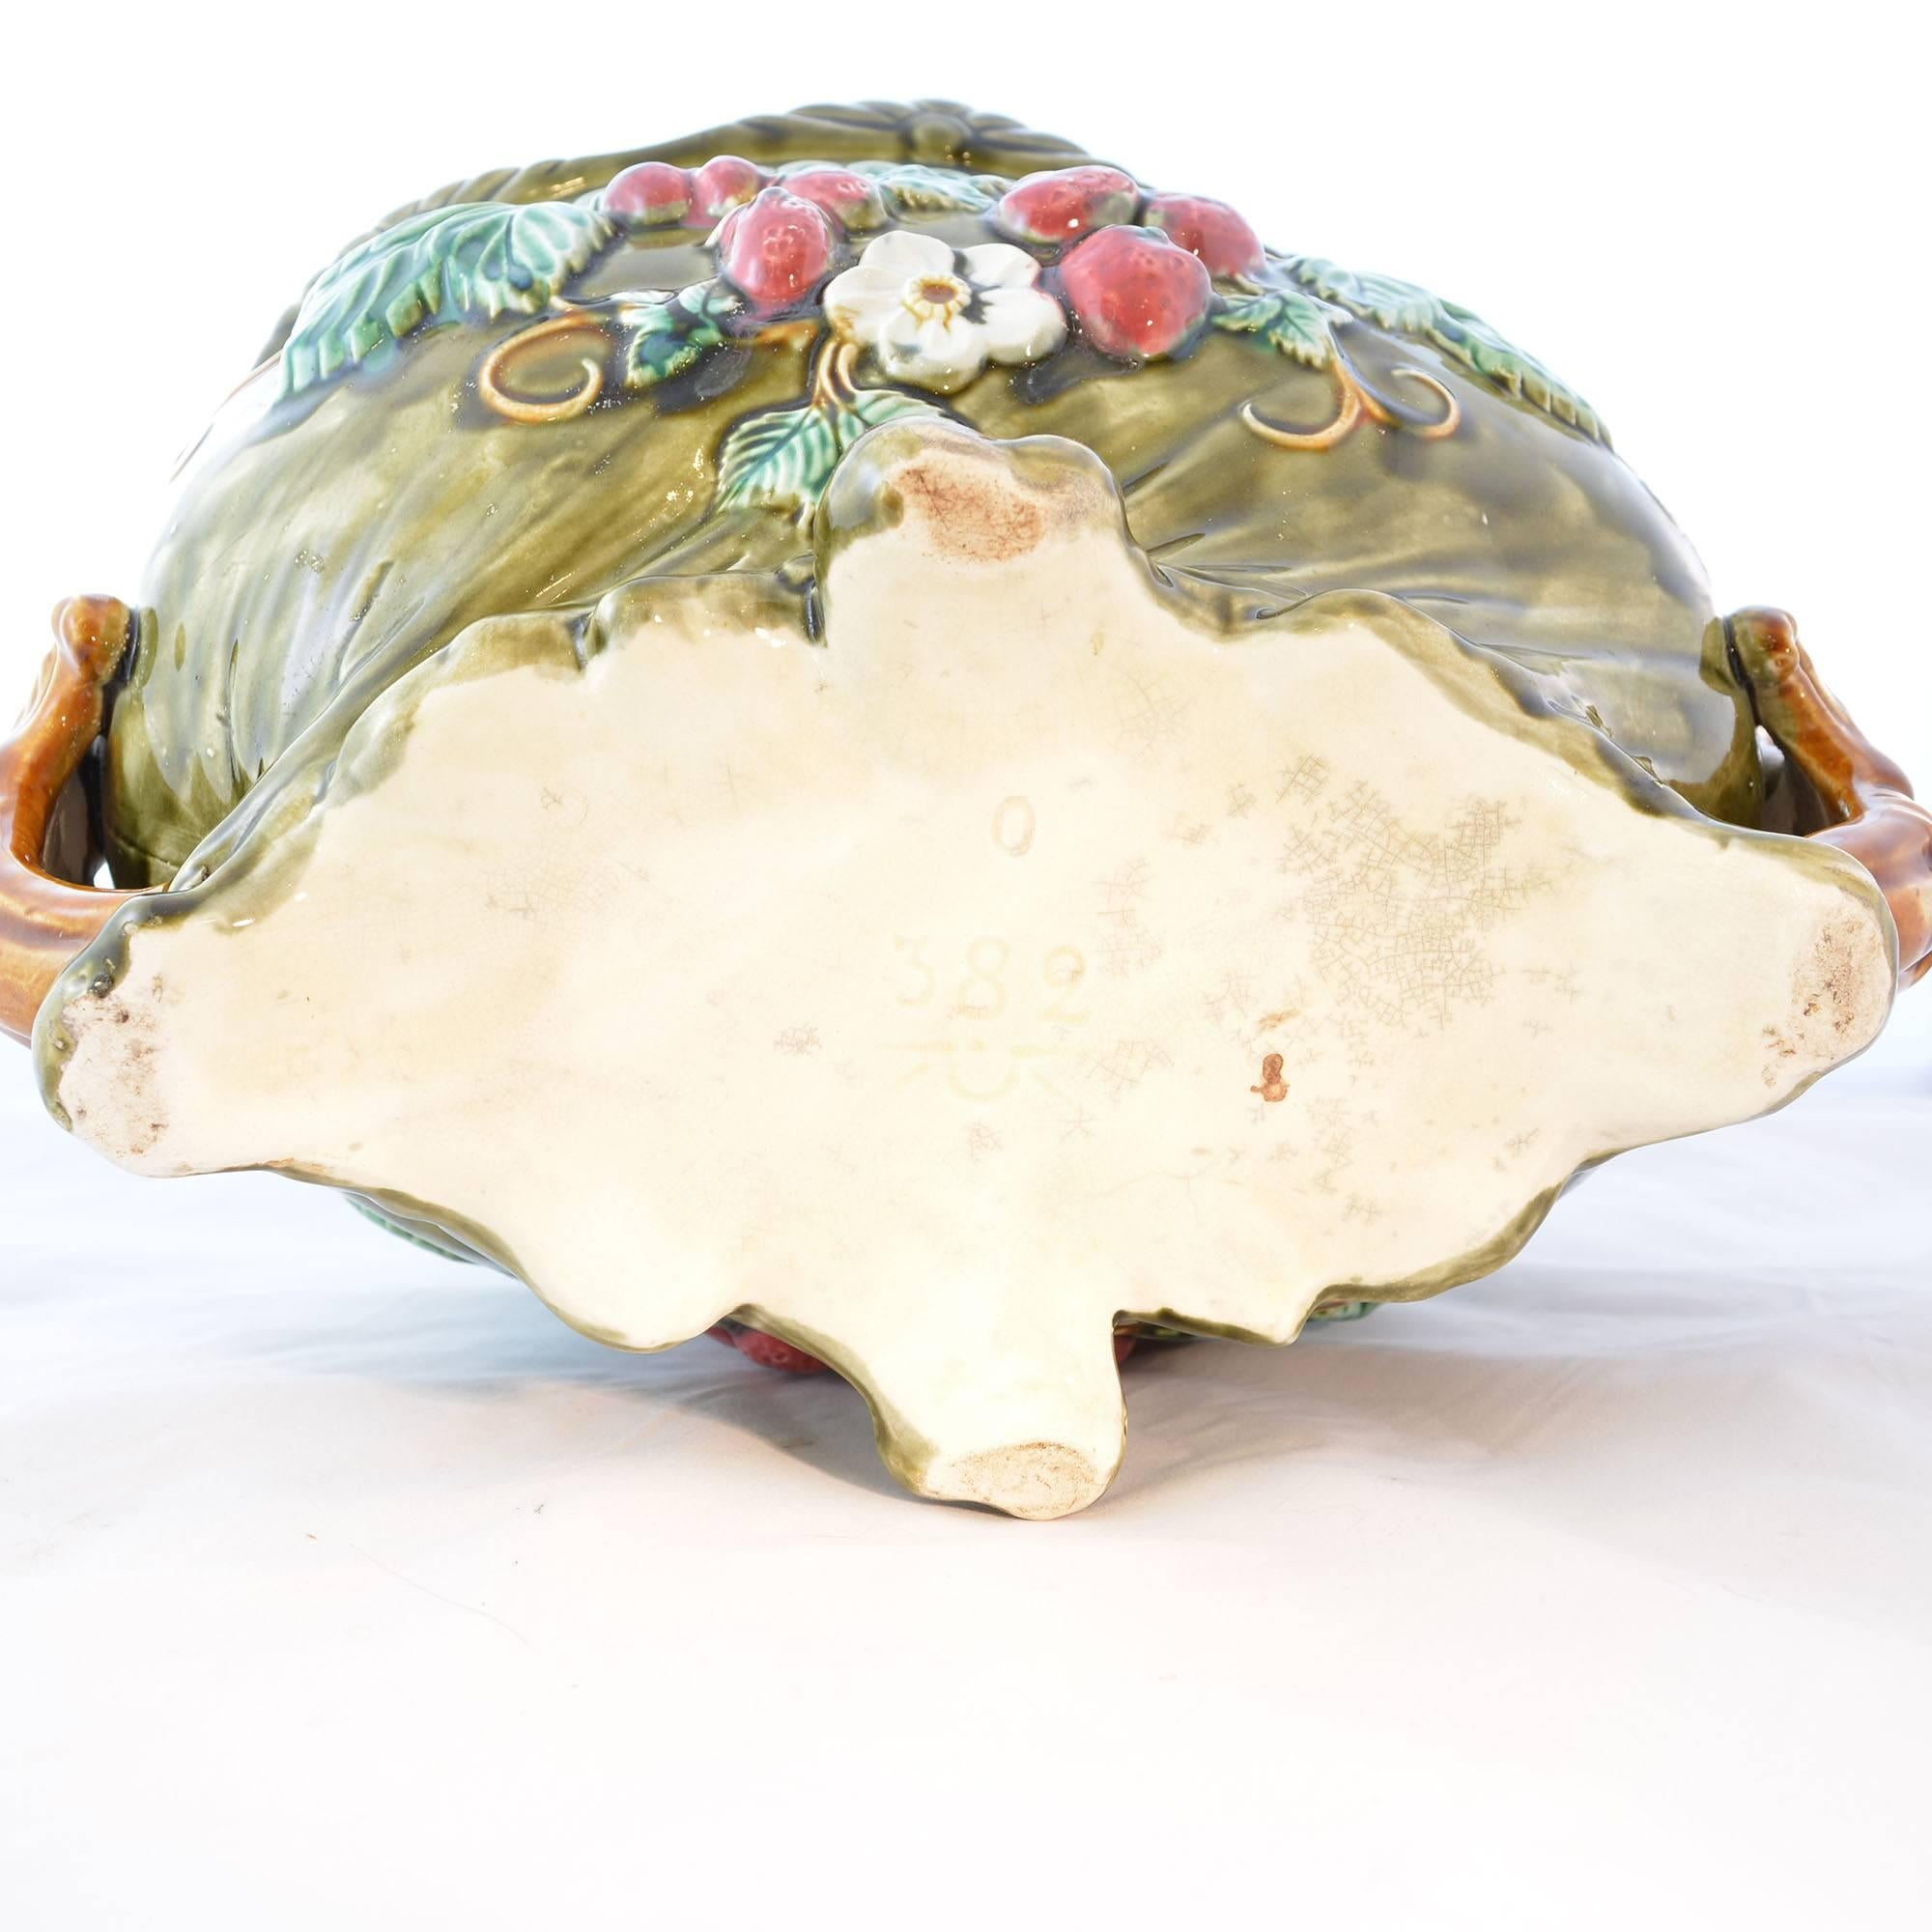 A colorful antique Onnaing French Majolica jardinière. The jardinière is oblong with a wavy flared rim, and a raised floral design on the side with strawberry shaped accents. There is a teal finish inside of the jardinière and a green glaze on the